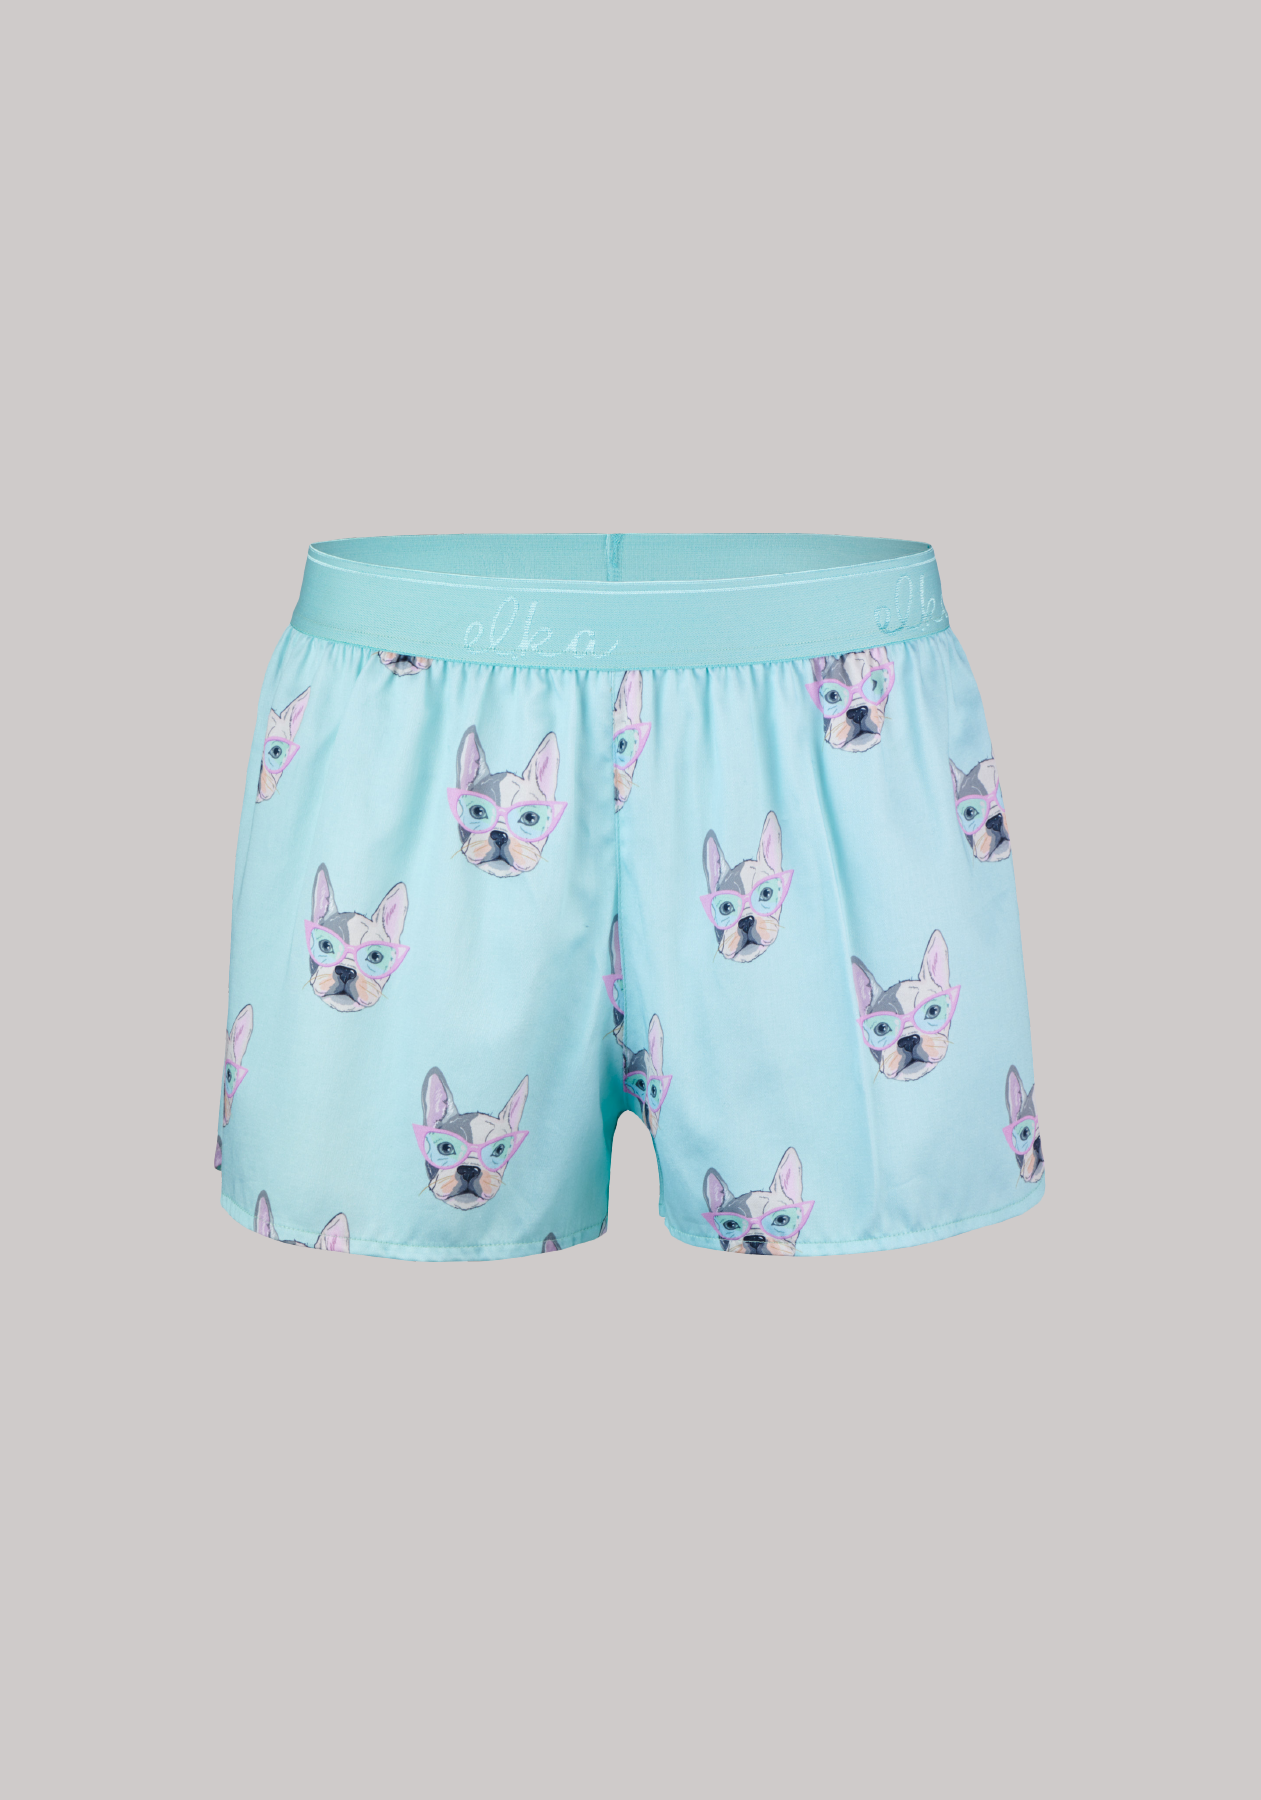 Women's shorts active French bulldogs